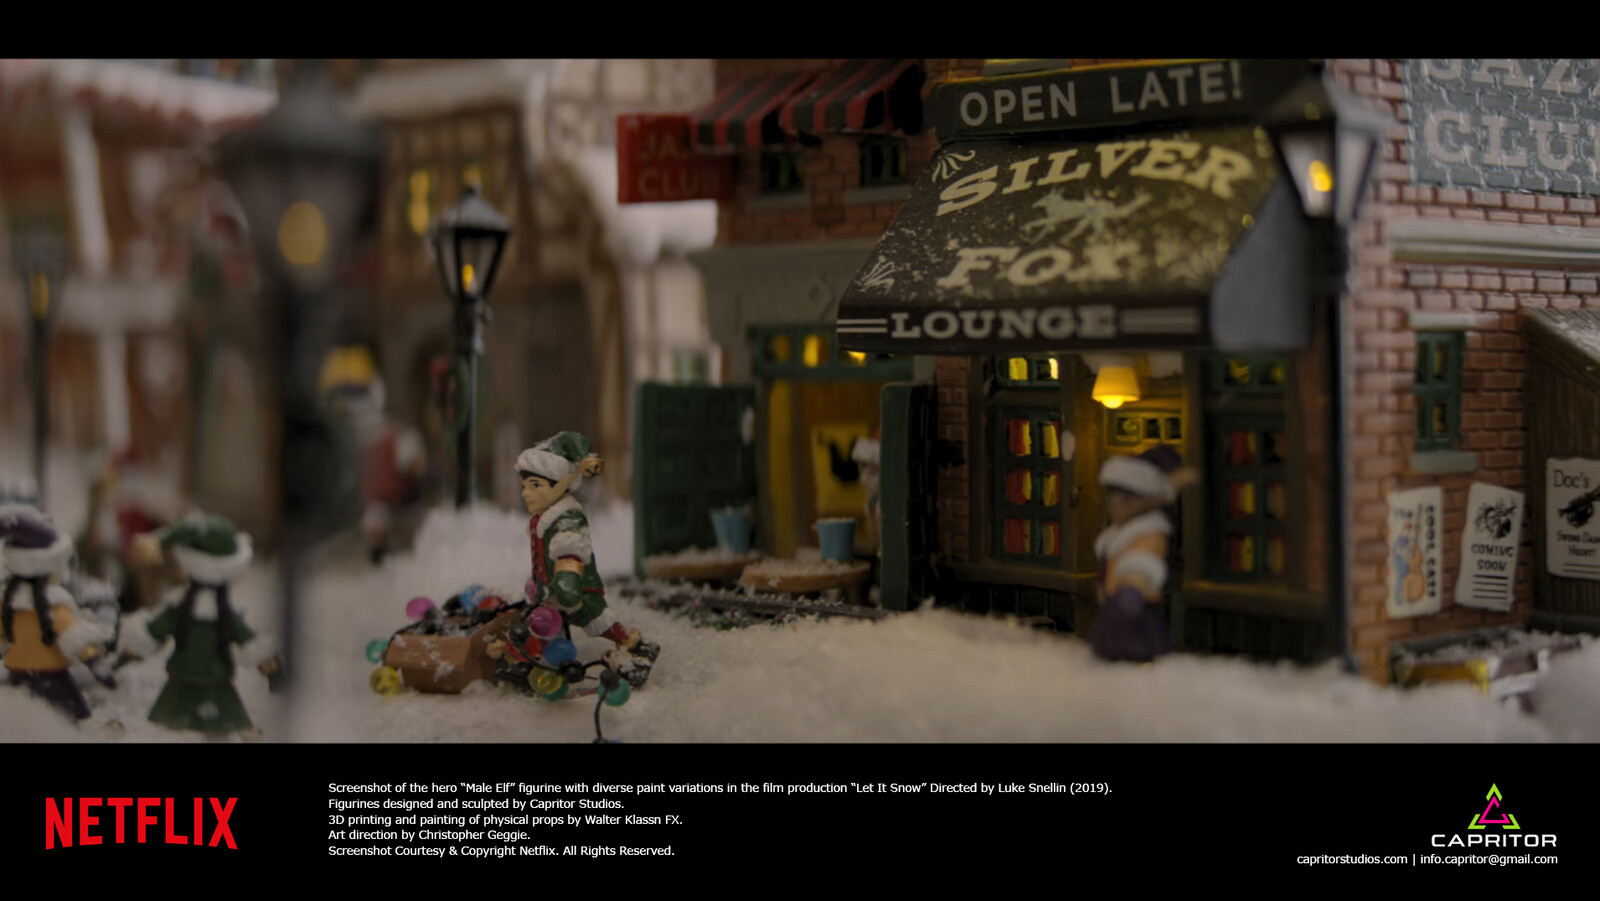 Hero "Female Elf" Figurines on the miniatures set. They can be seen on the left of the screenshot.